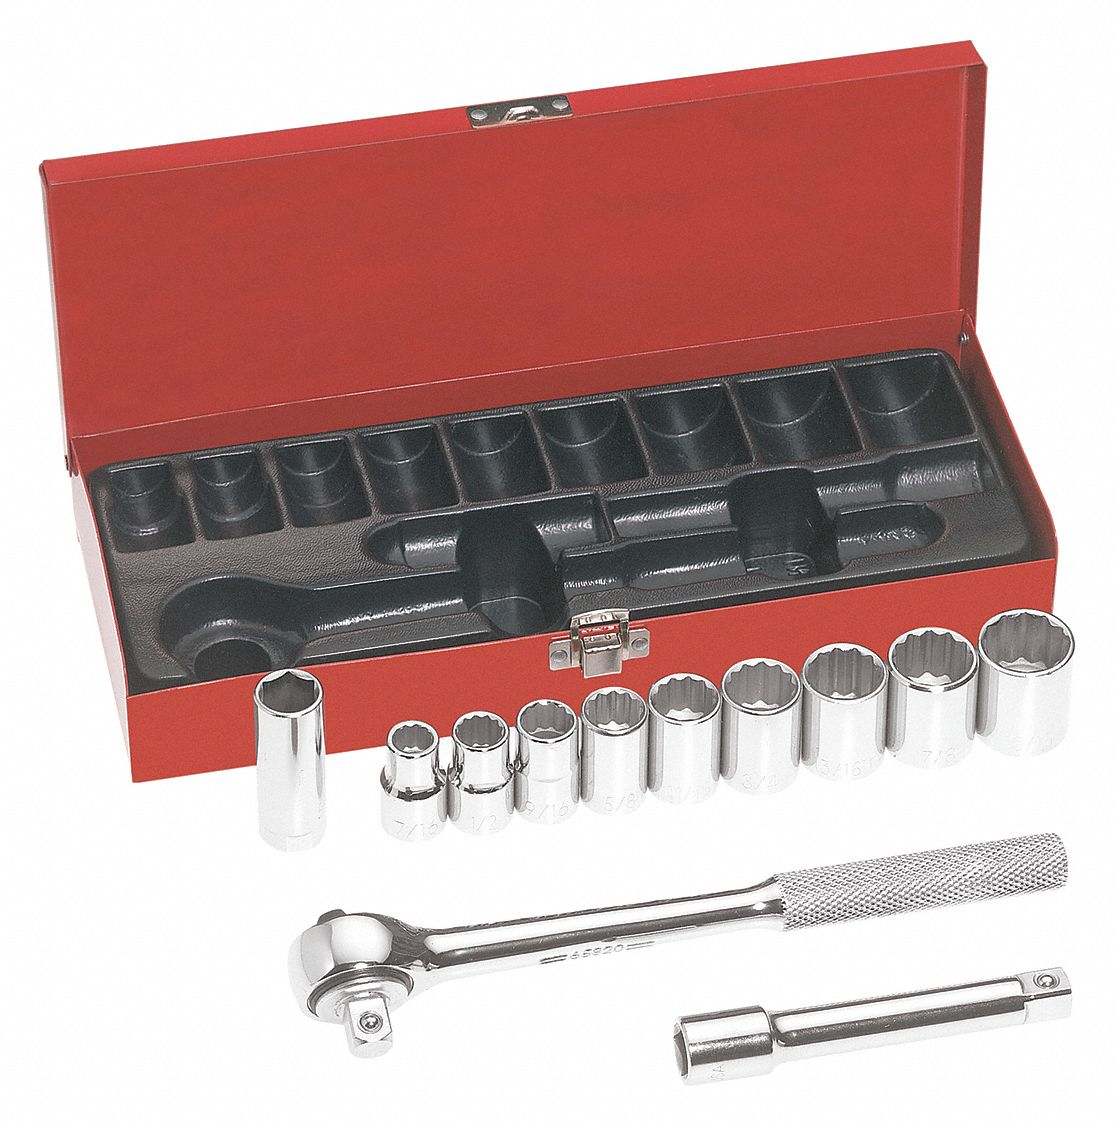 40Y453 - 12-Piece Drive Socket Wrench Set